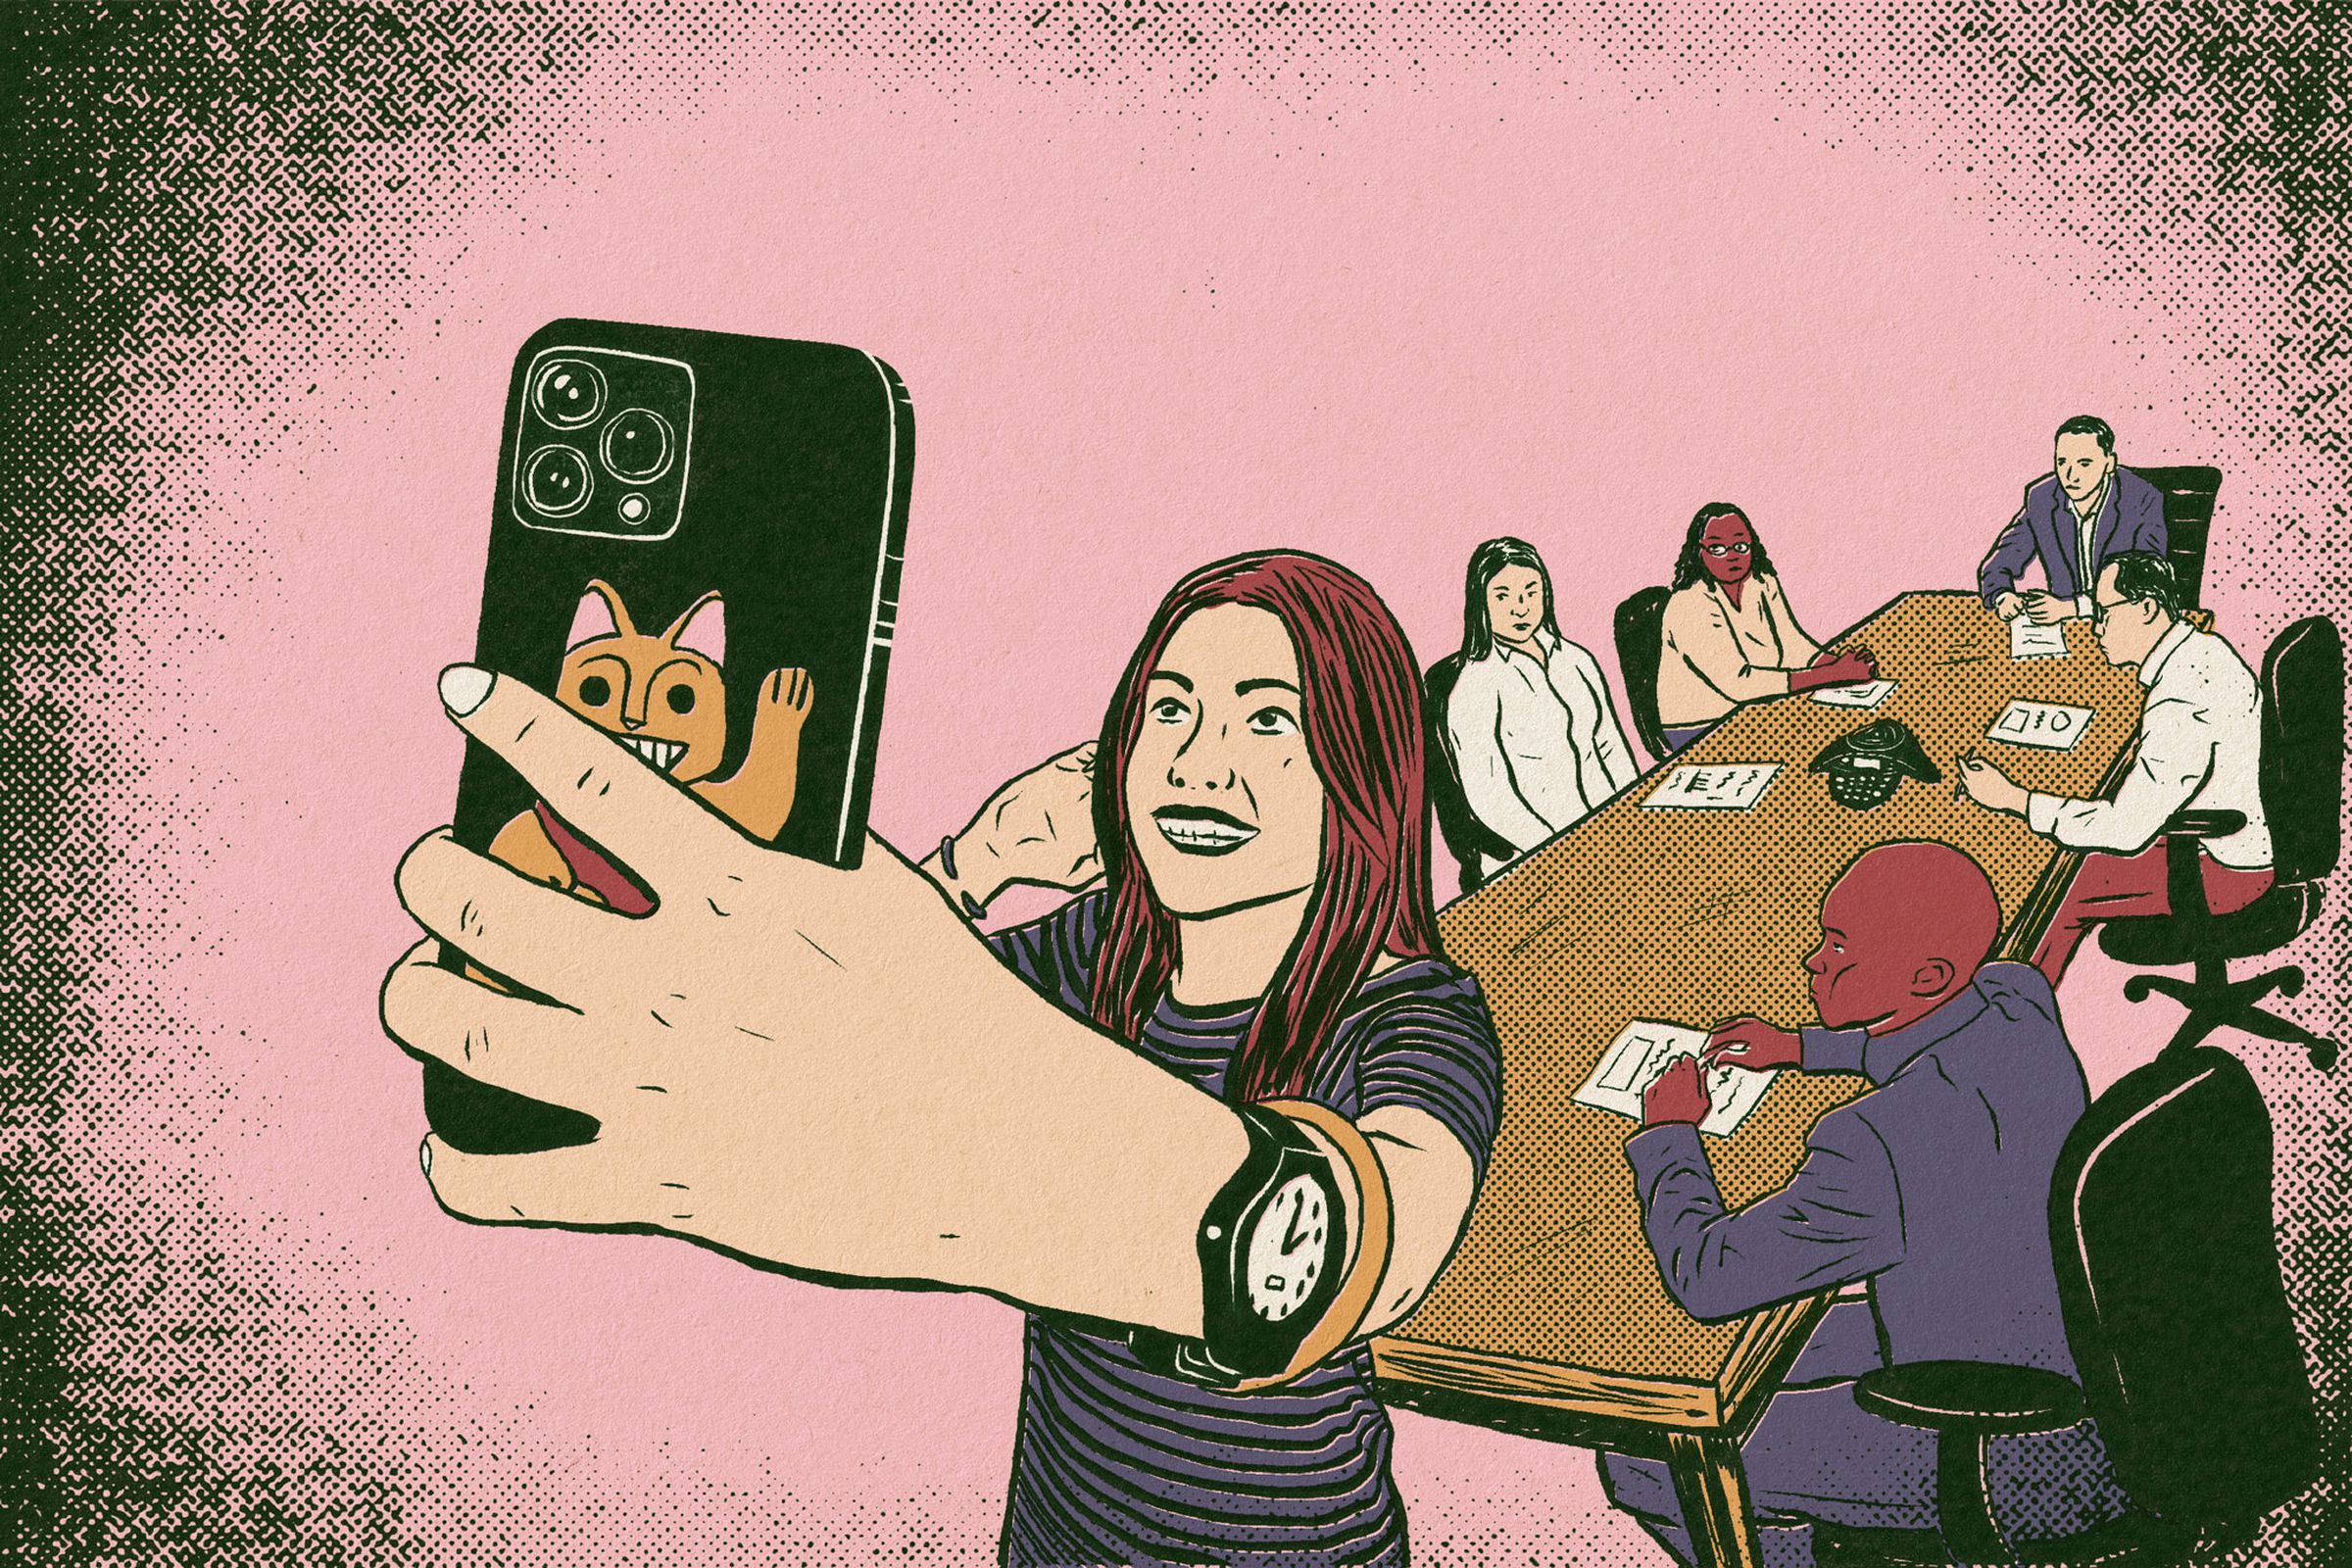 An illustration of a woman holding her phone up, selfie-style in a conference room while a meeting appears to be happening. Several co-workers are seated at a long table, watching her record a video.